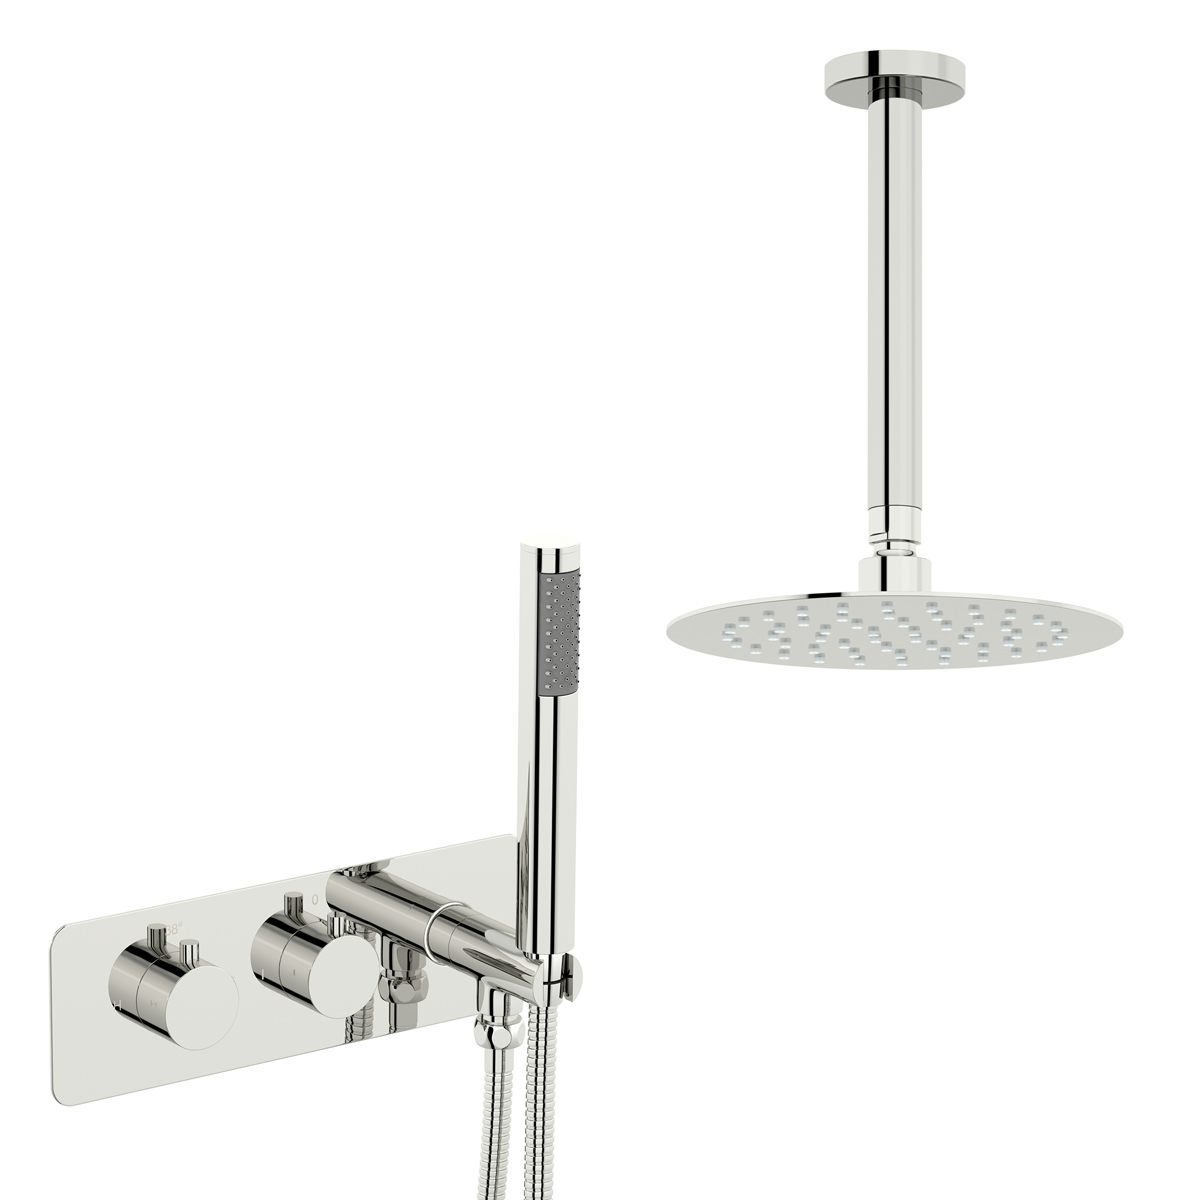 Mode Harrison round concealed thermostatic mixer shower with ceiling arm 200mm shower head